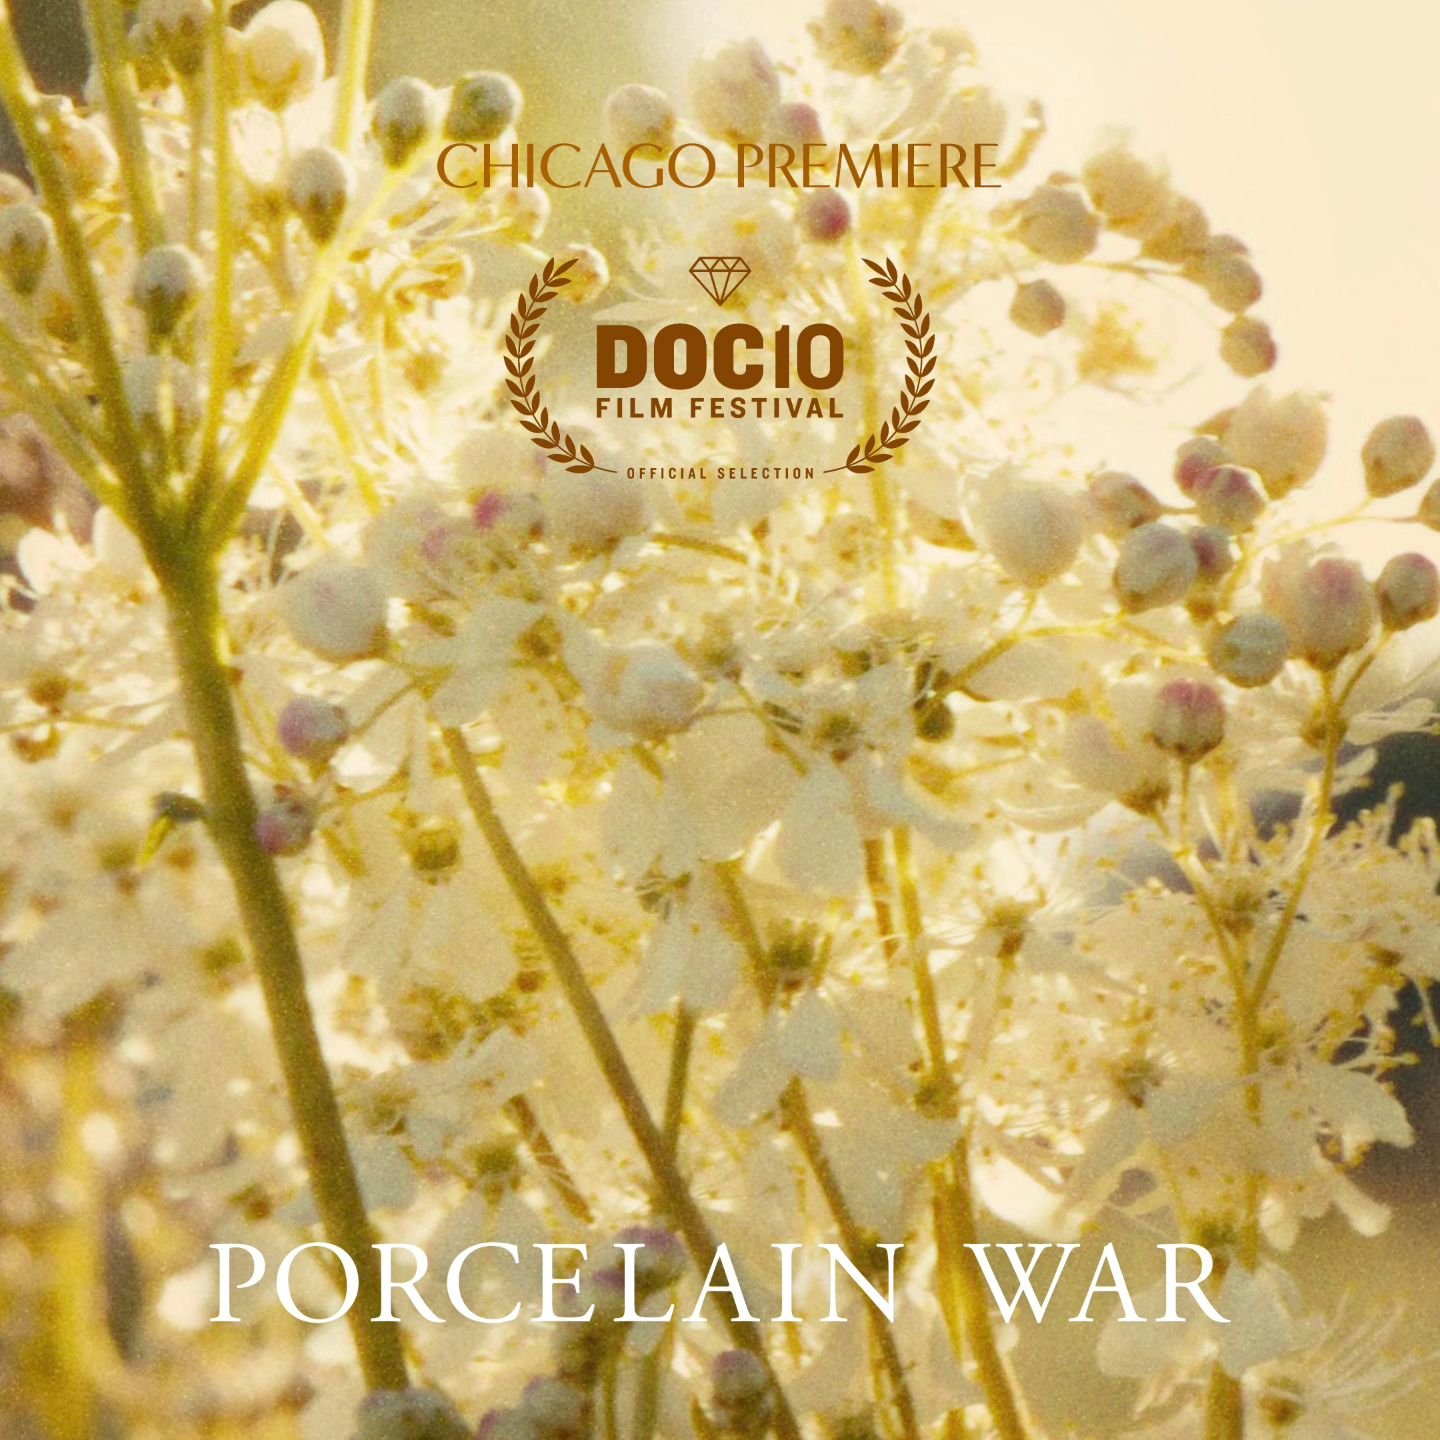 A huge thank you to Doc10 film festival for the incredible honor of sharing Porcelain War with audiences in Chicago - the sister city of Kyiv, Ukraine. 

The festival screens the best documentaries, culled from Sundance, Tribeca, Hot Docs, DOC NYC, a